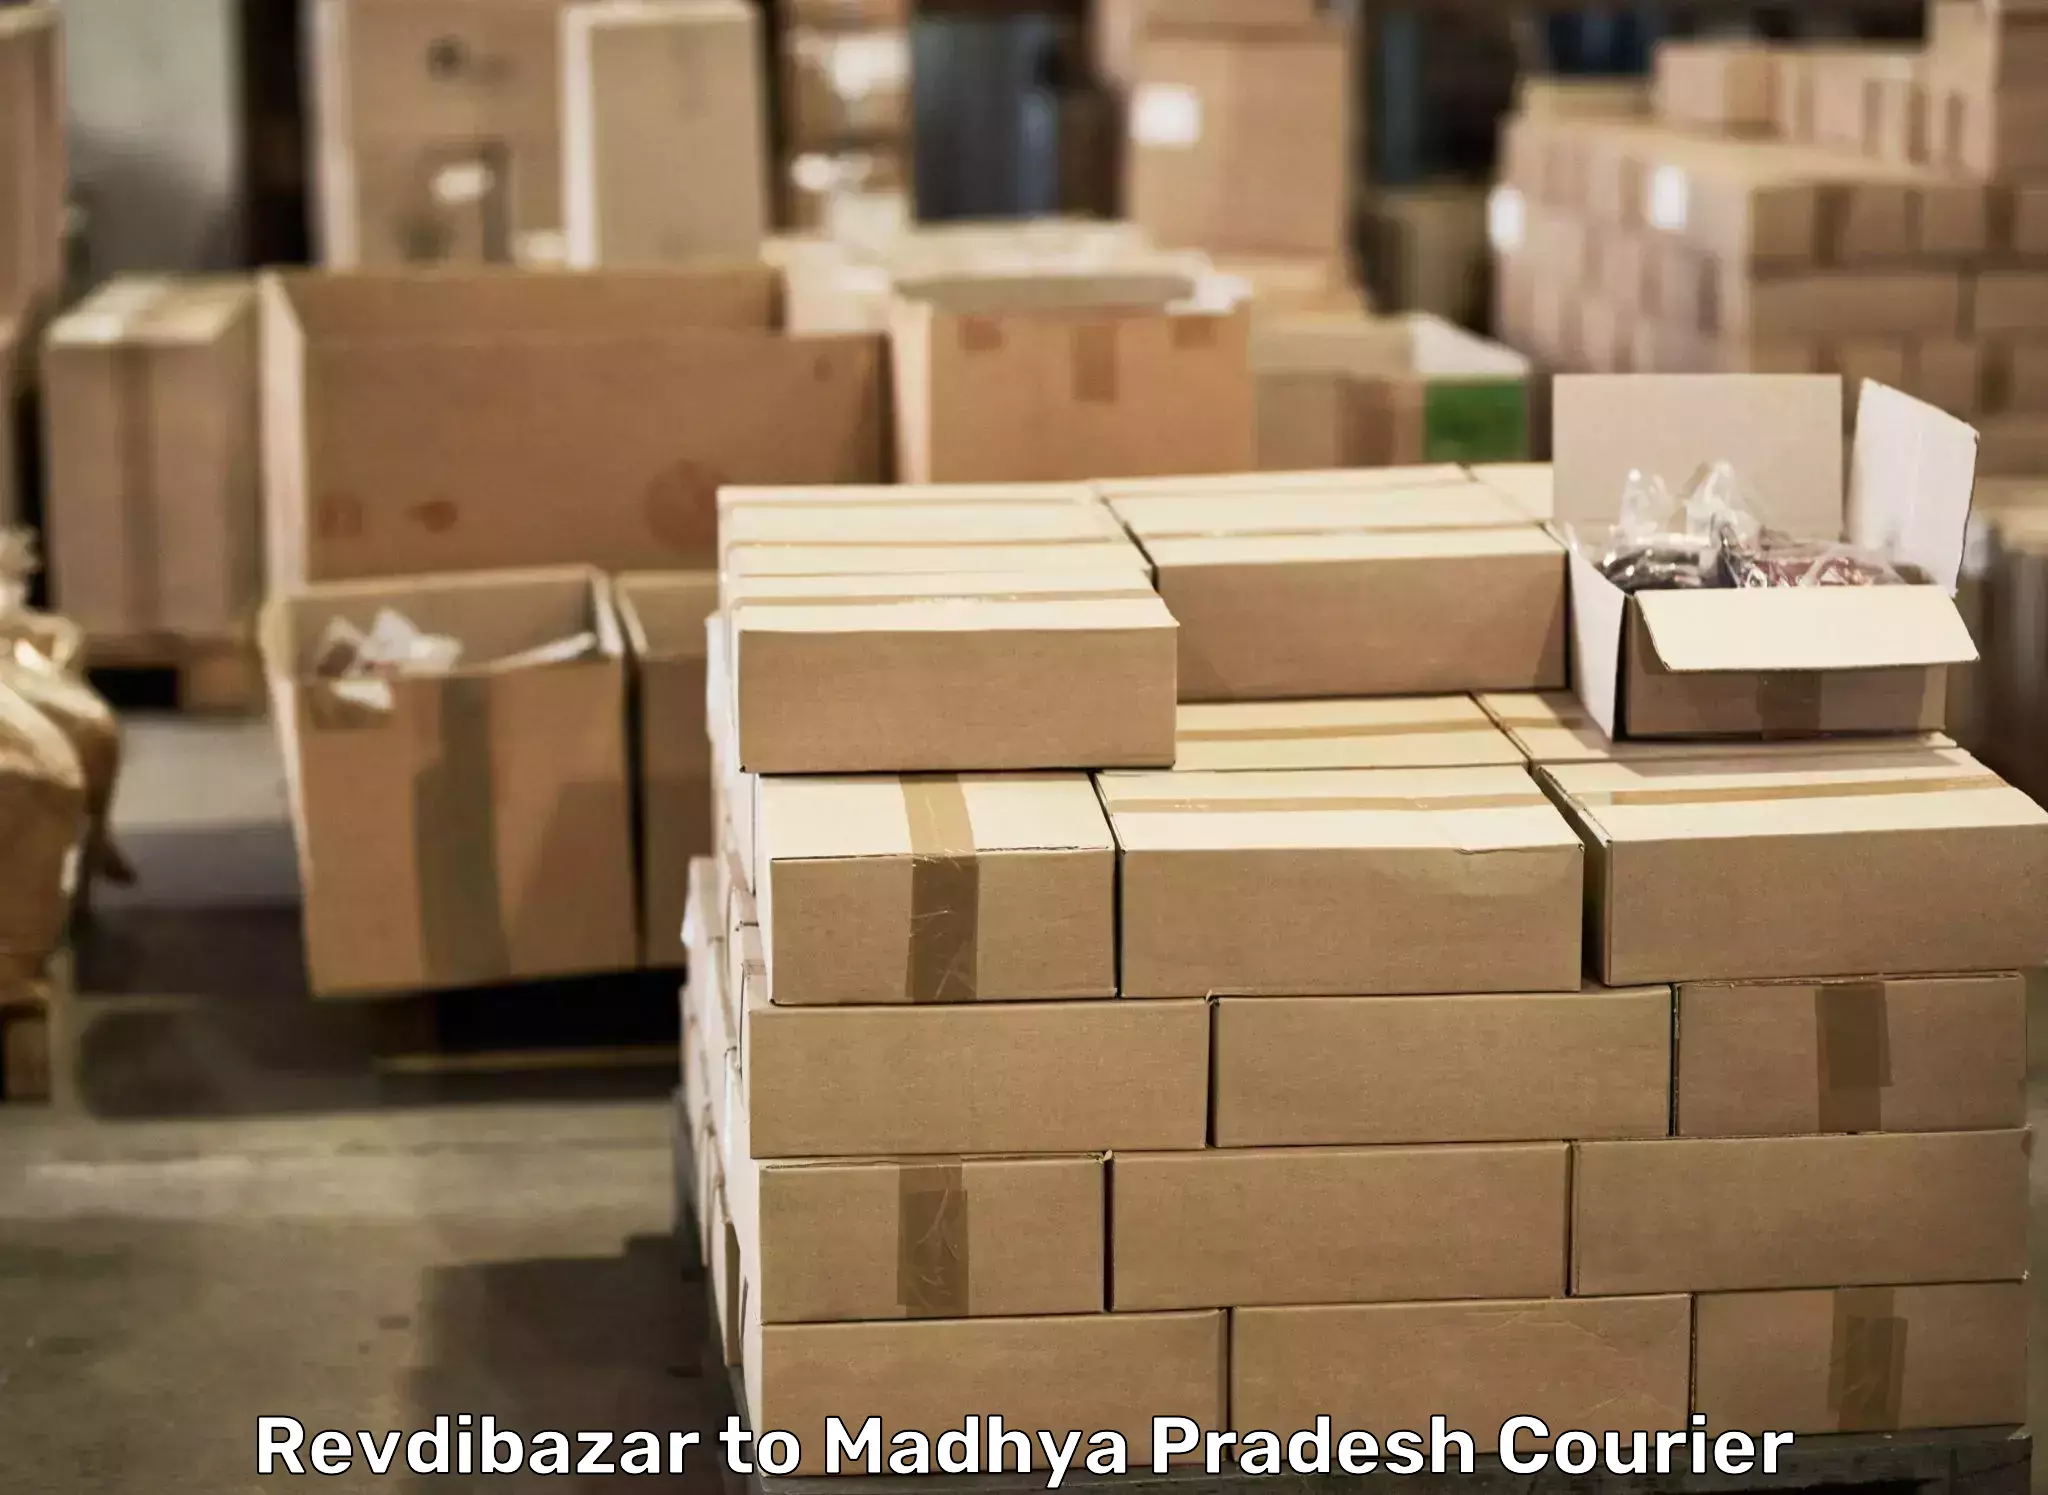 Moving and storage services Revdibazar to Rewa